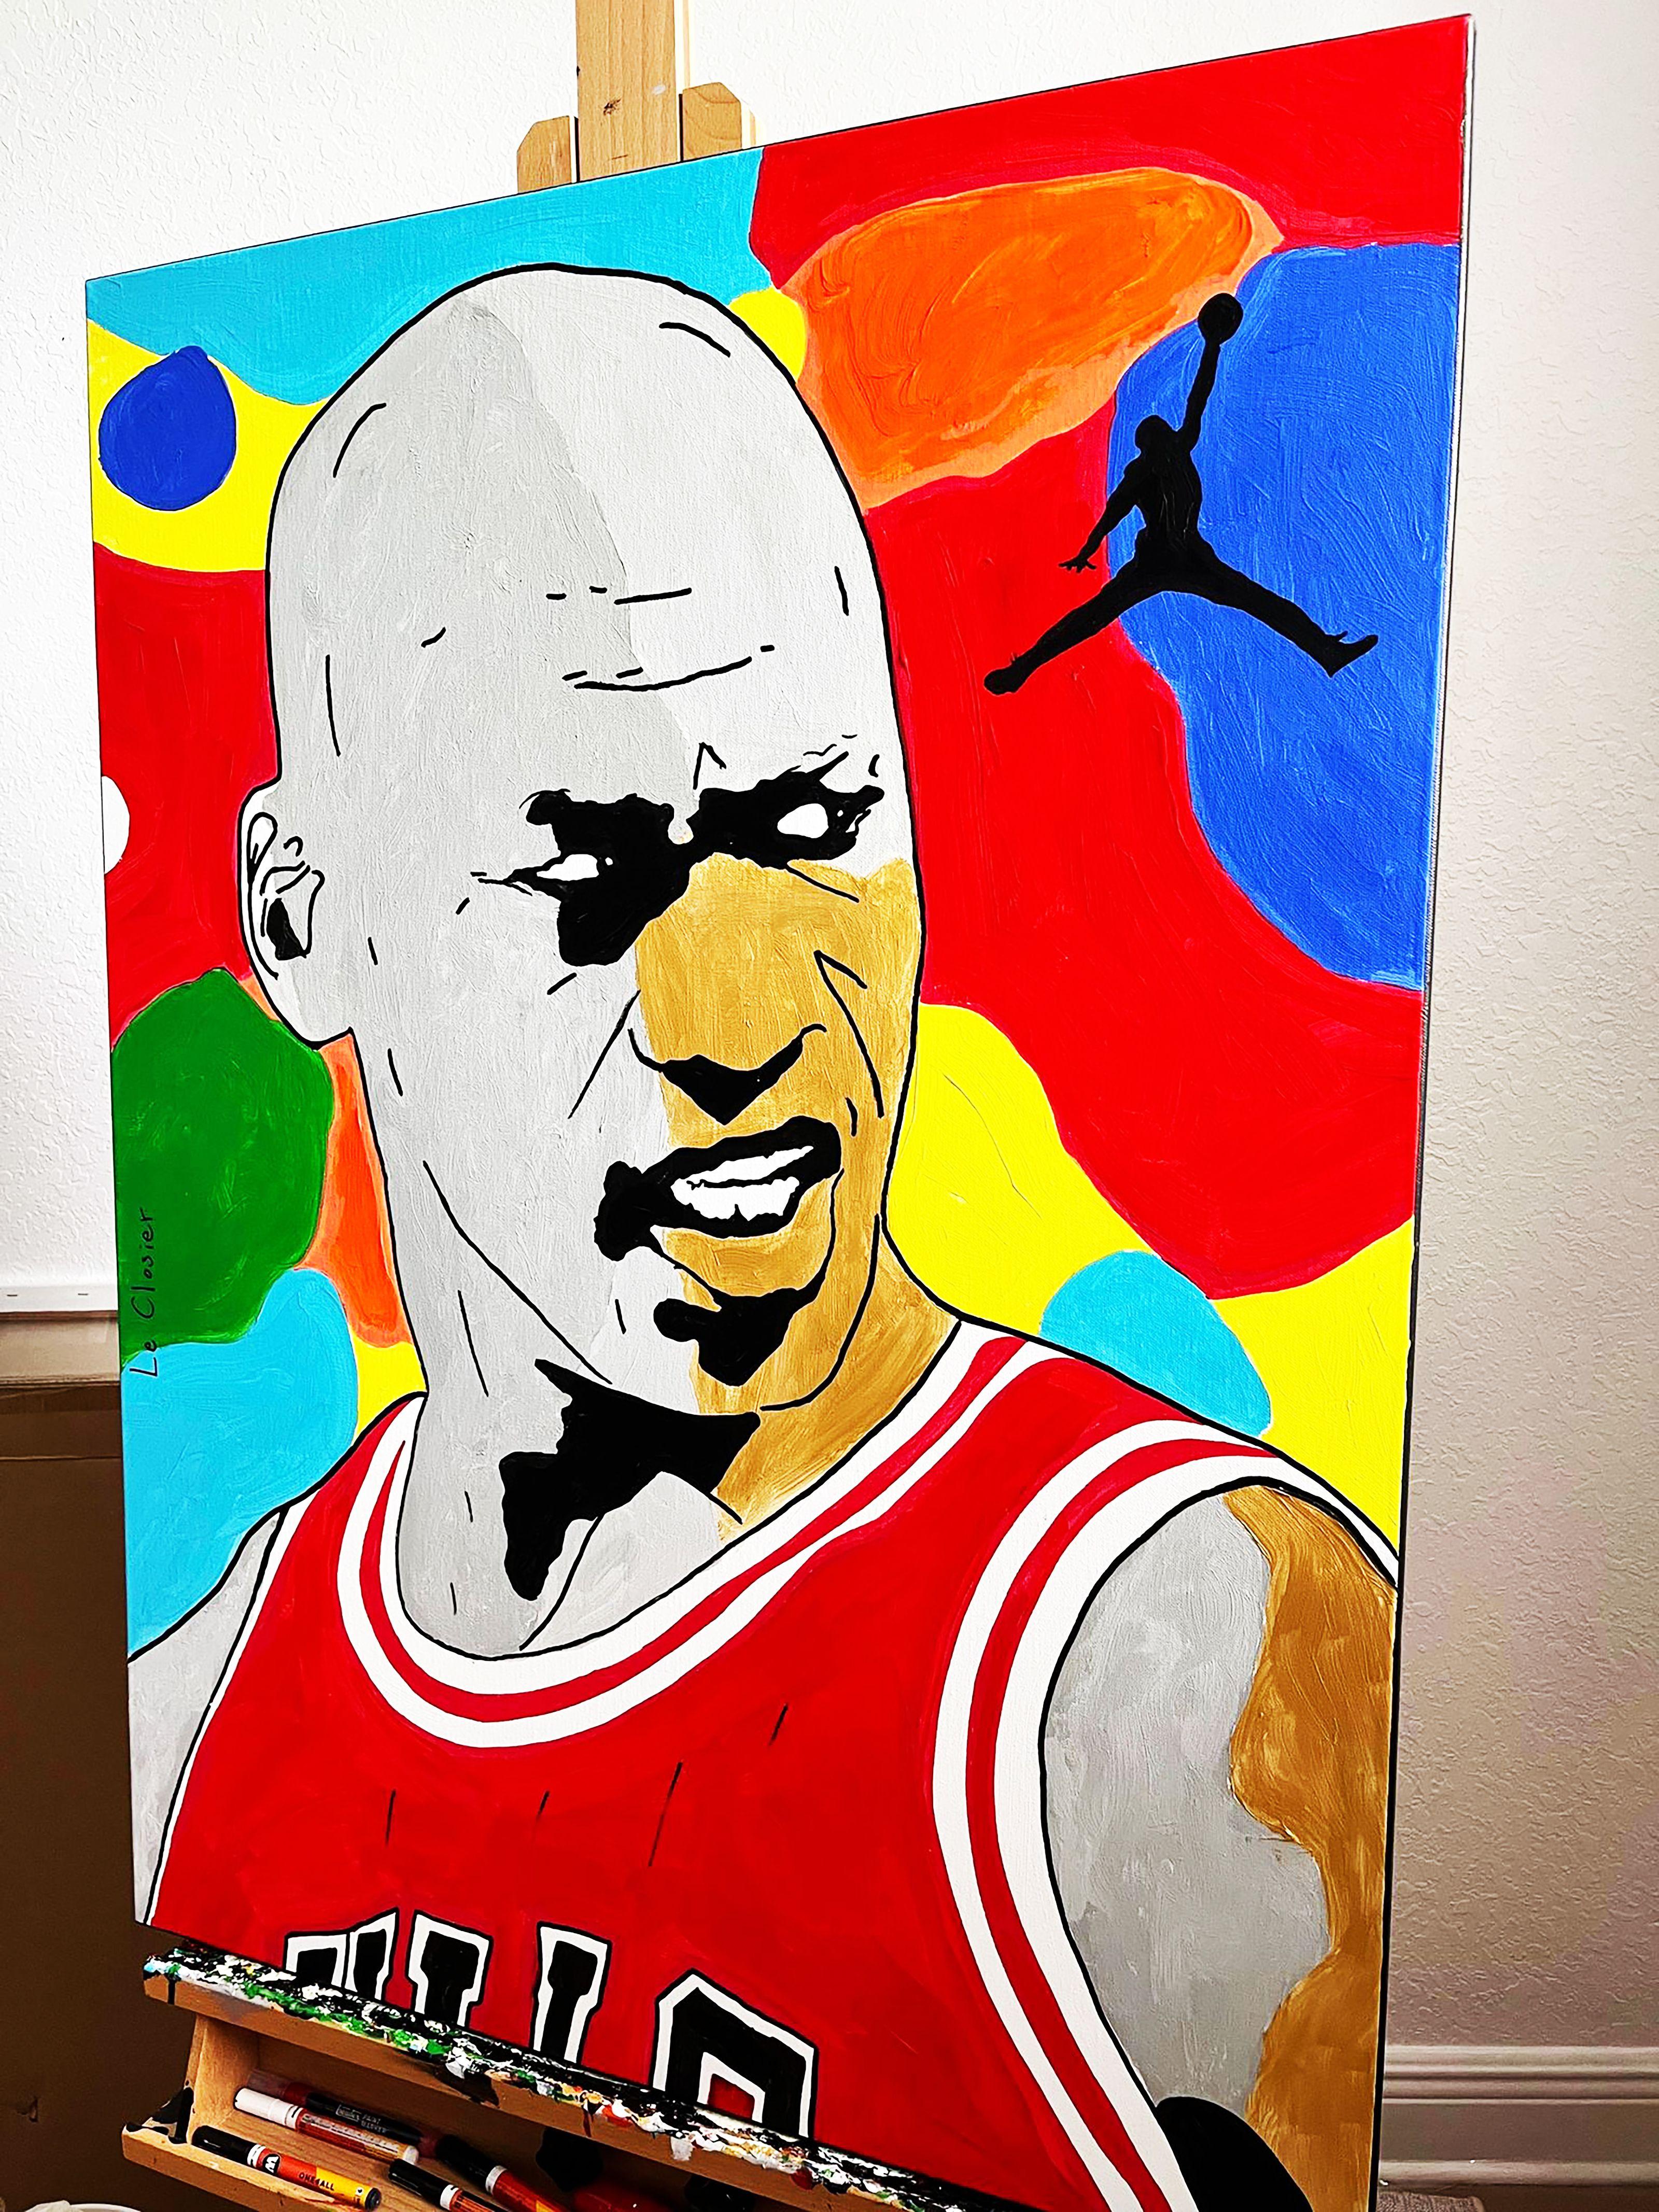 6 x NBA finals champion and legend Michael Jordan.    Acrylic and oil on canvas. 30